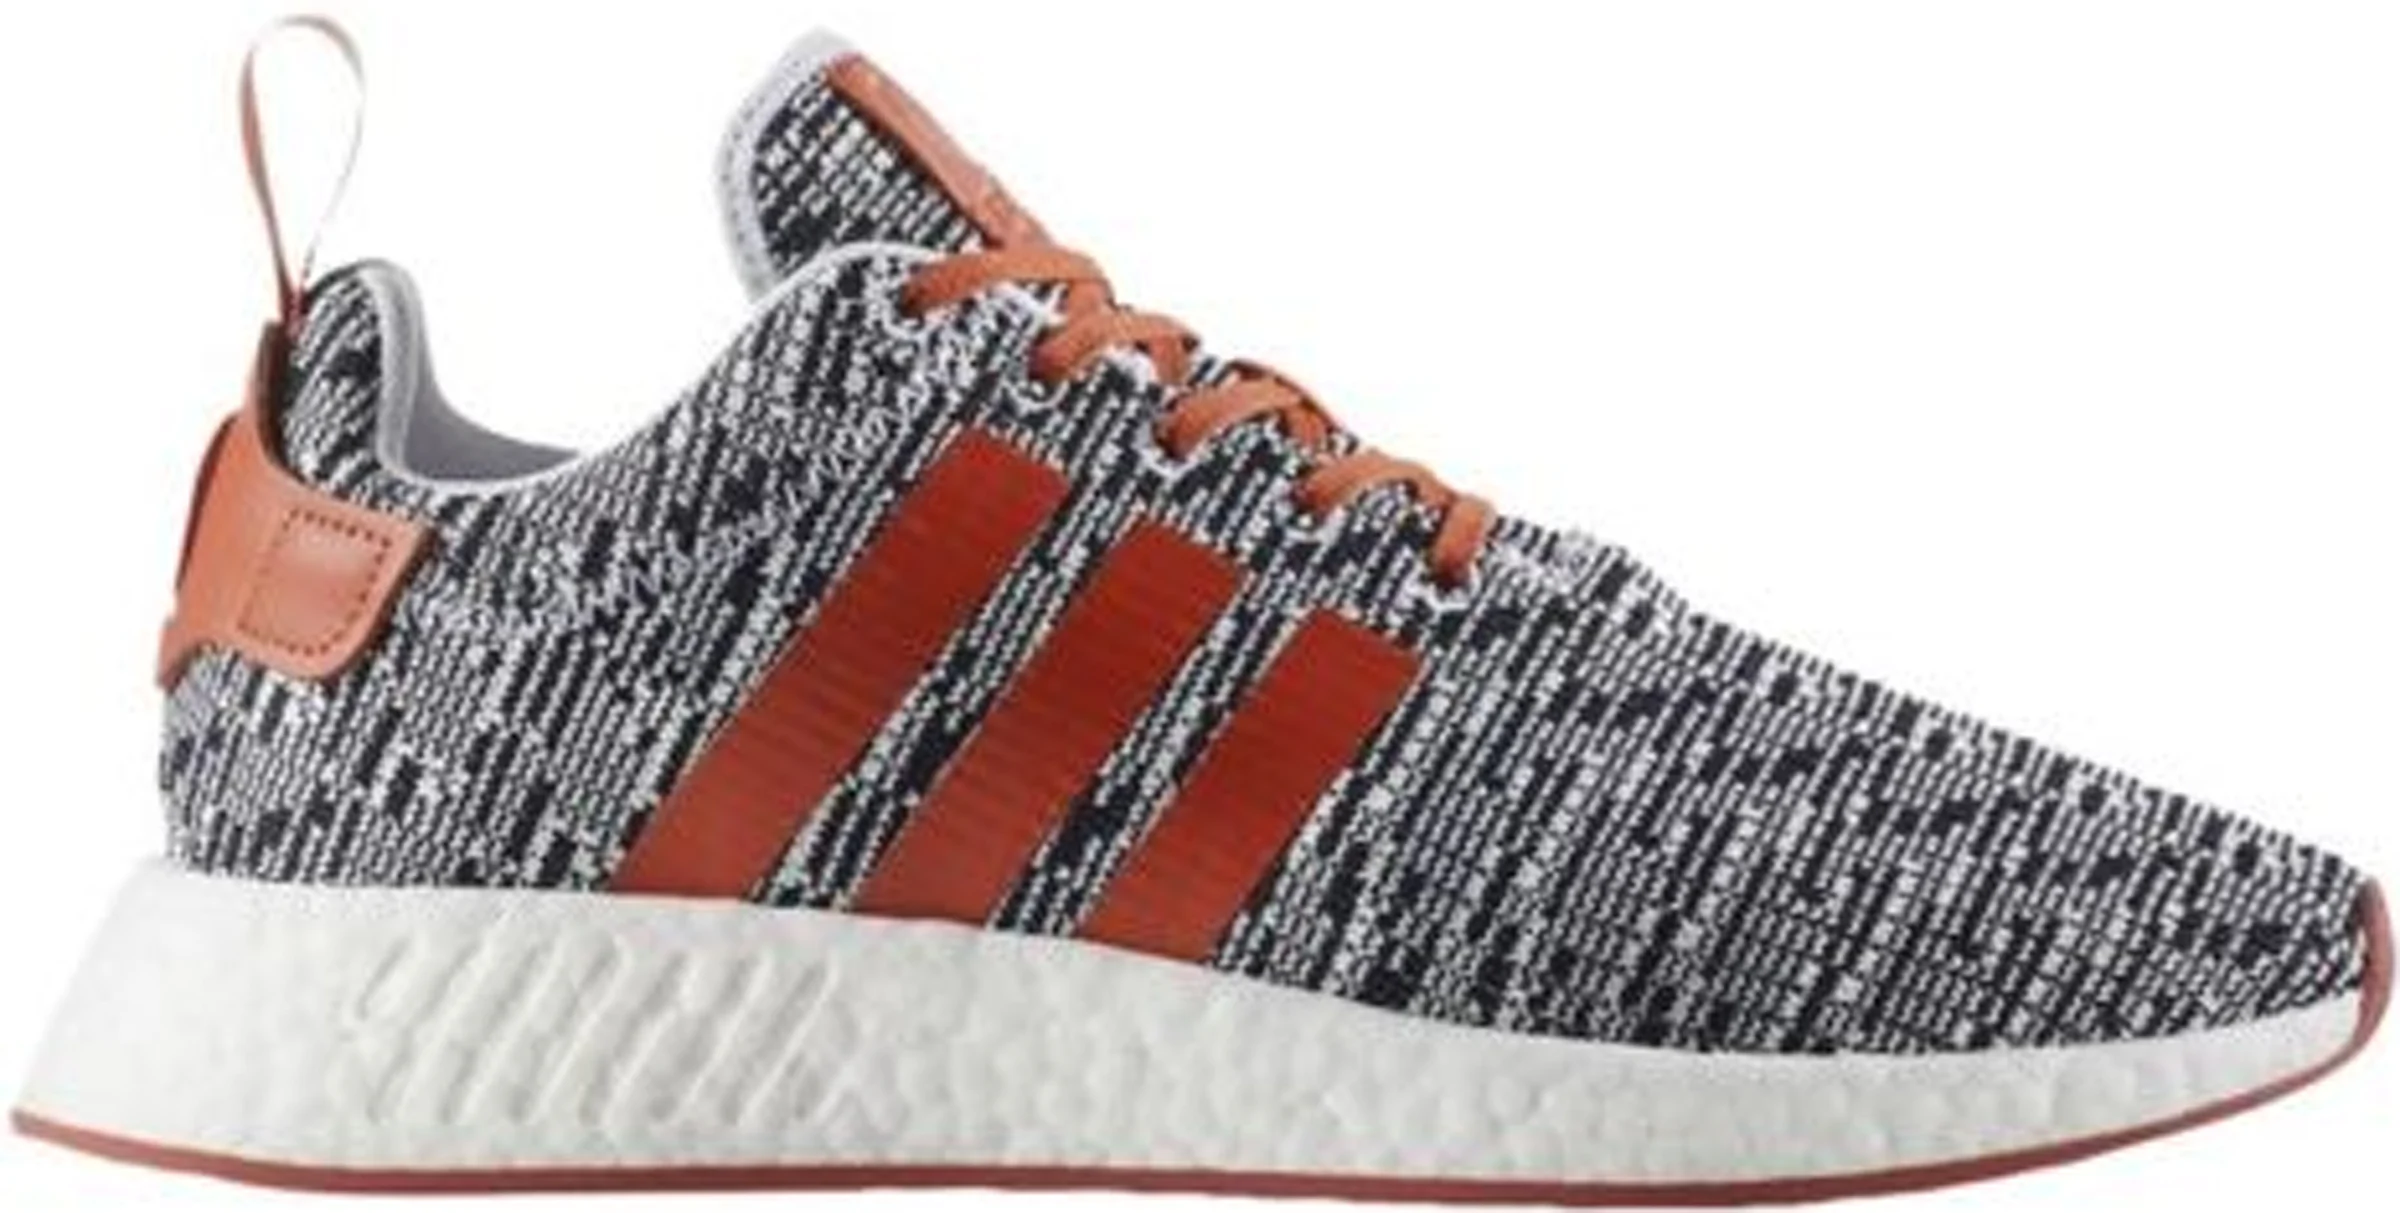 https://images.stockx.com/images/Adidas-NMD-R2-White-Grey-Solar-Red.png?fit=fill&bg=FFFFFF&w=1200&h=857&fm=webp&auto=compress&dpr=2&trim=color&updated_at=1626898093&q=60